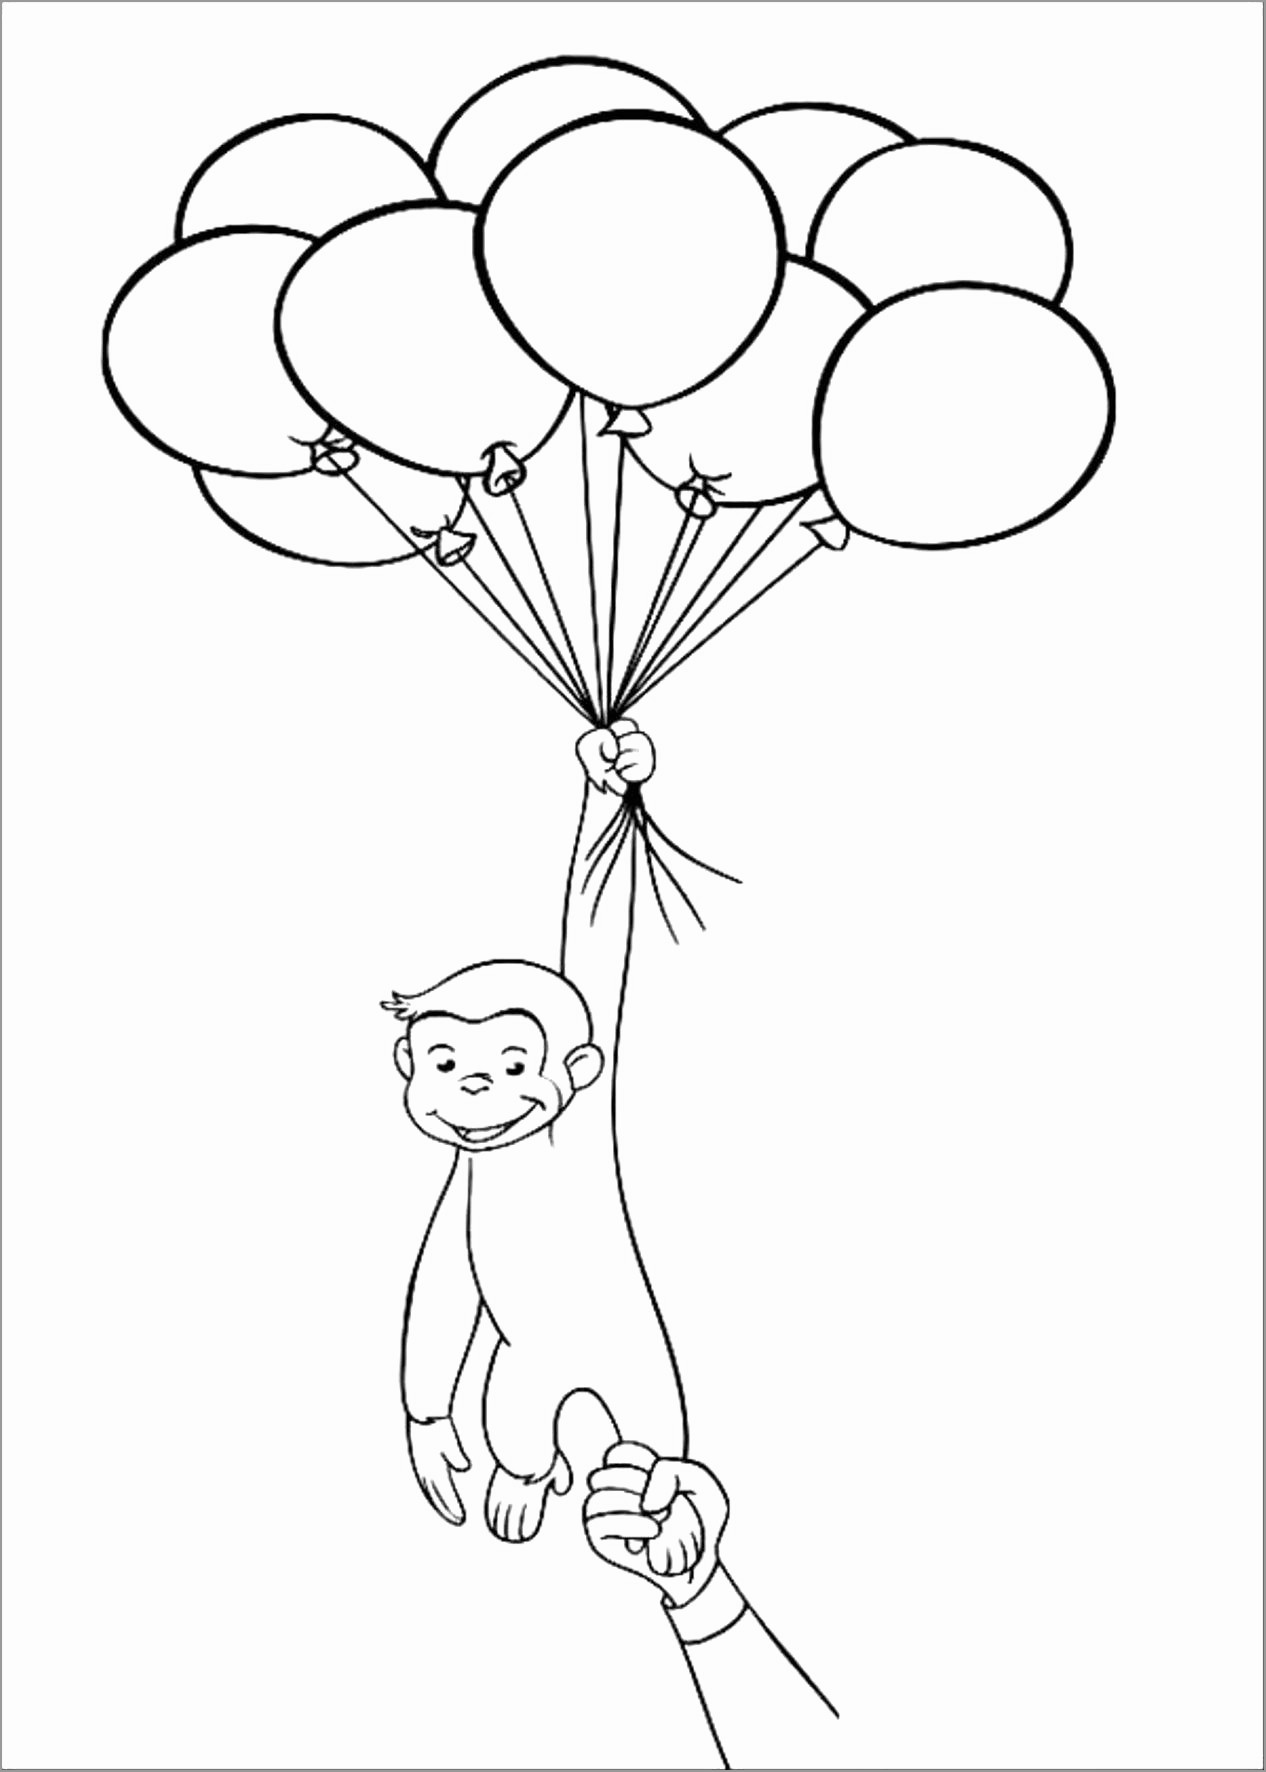 Curious George with Balloon Coloring Page